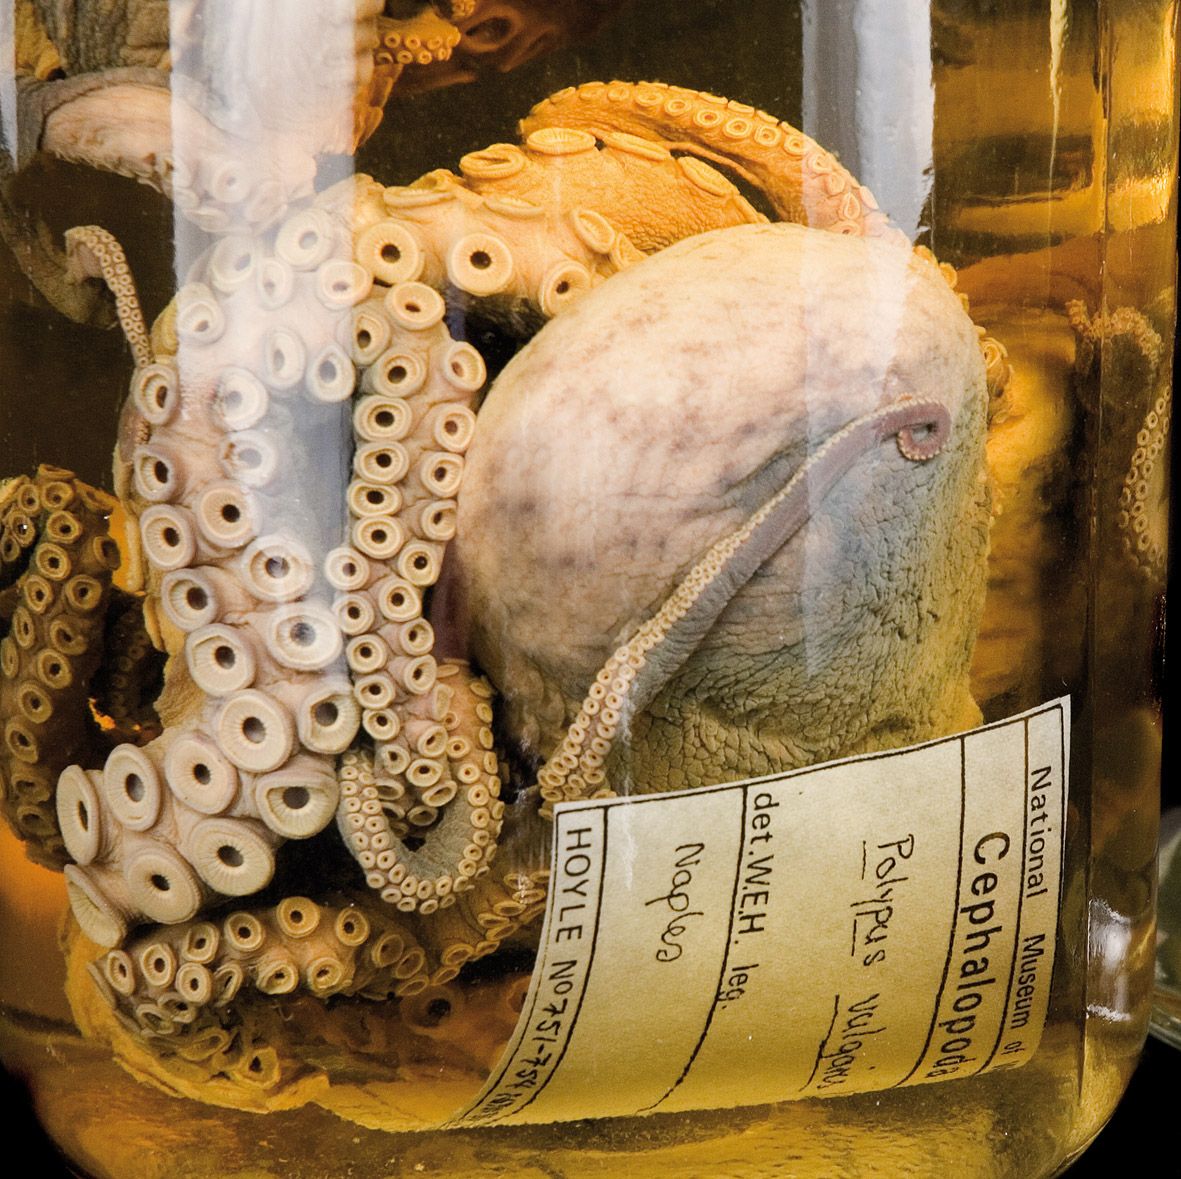 Mollusca collections